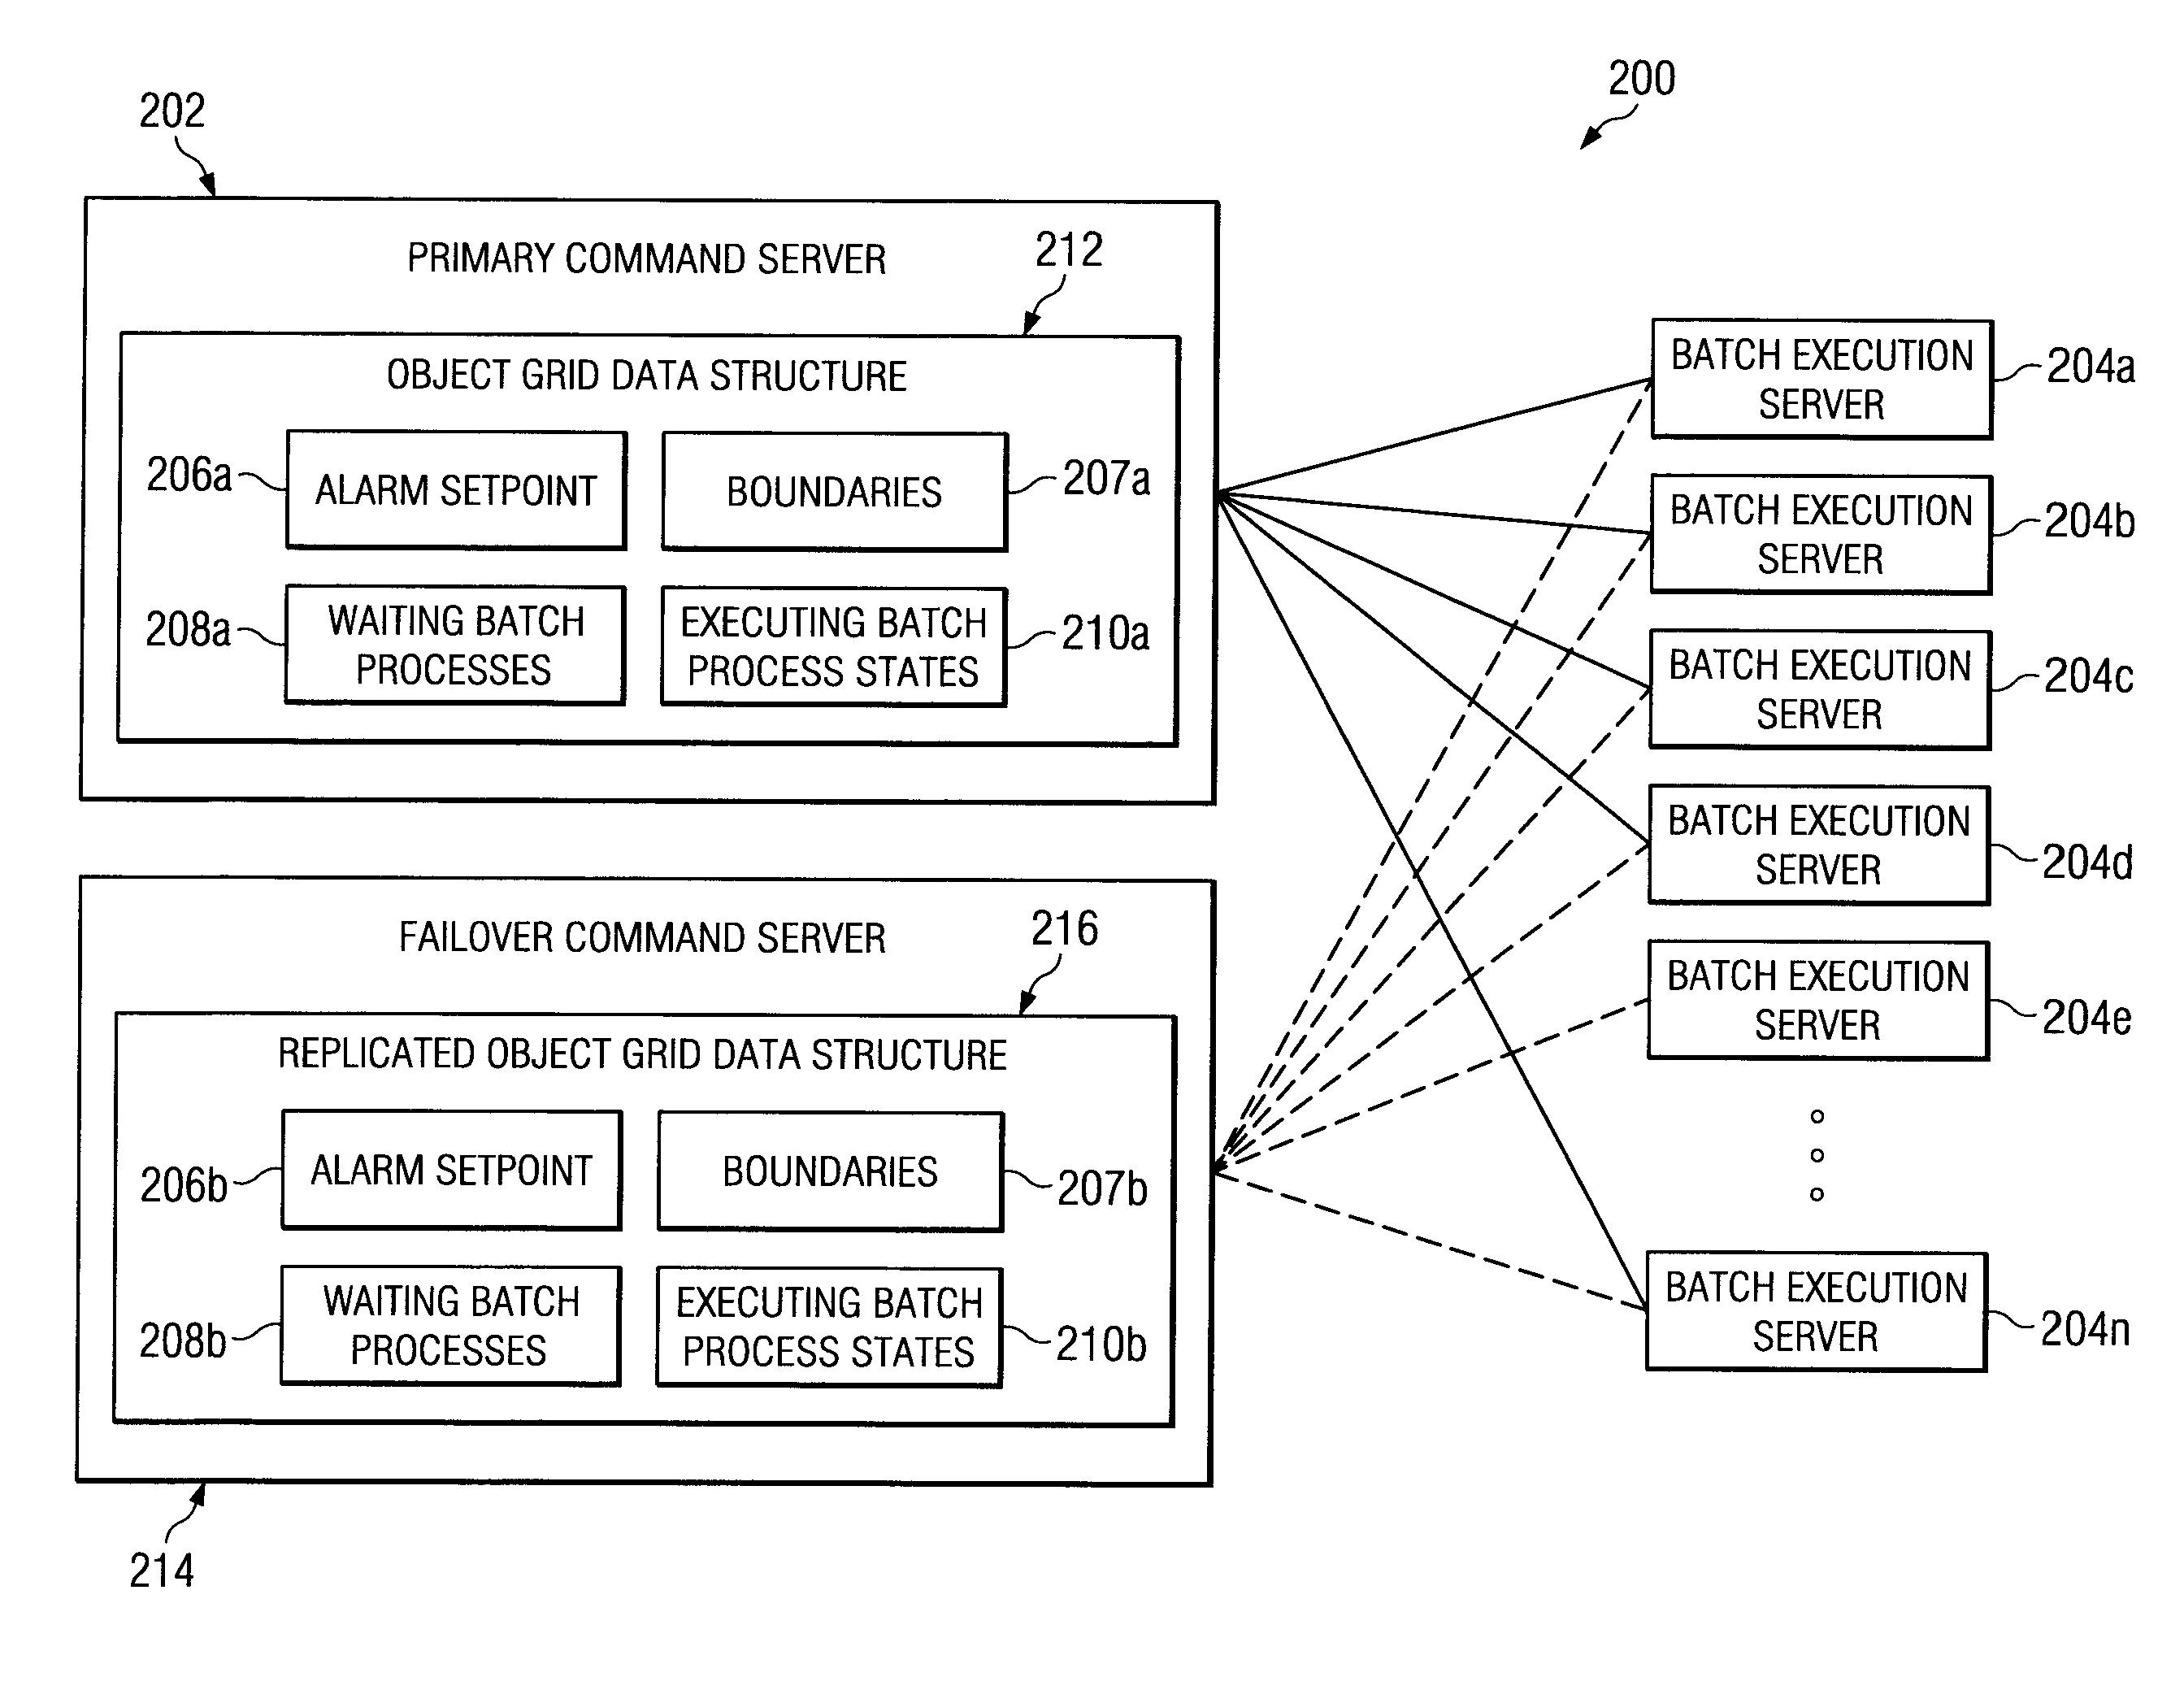 Mechanism to Enable and Ensure Failover Integrity and High Availability of Batch Processing